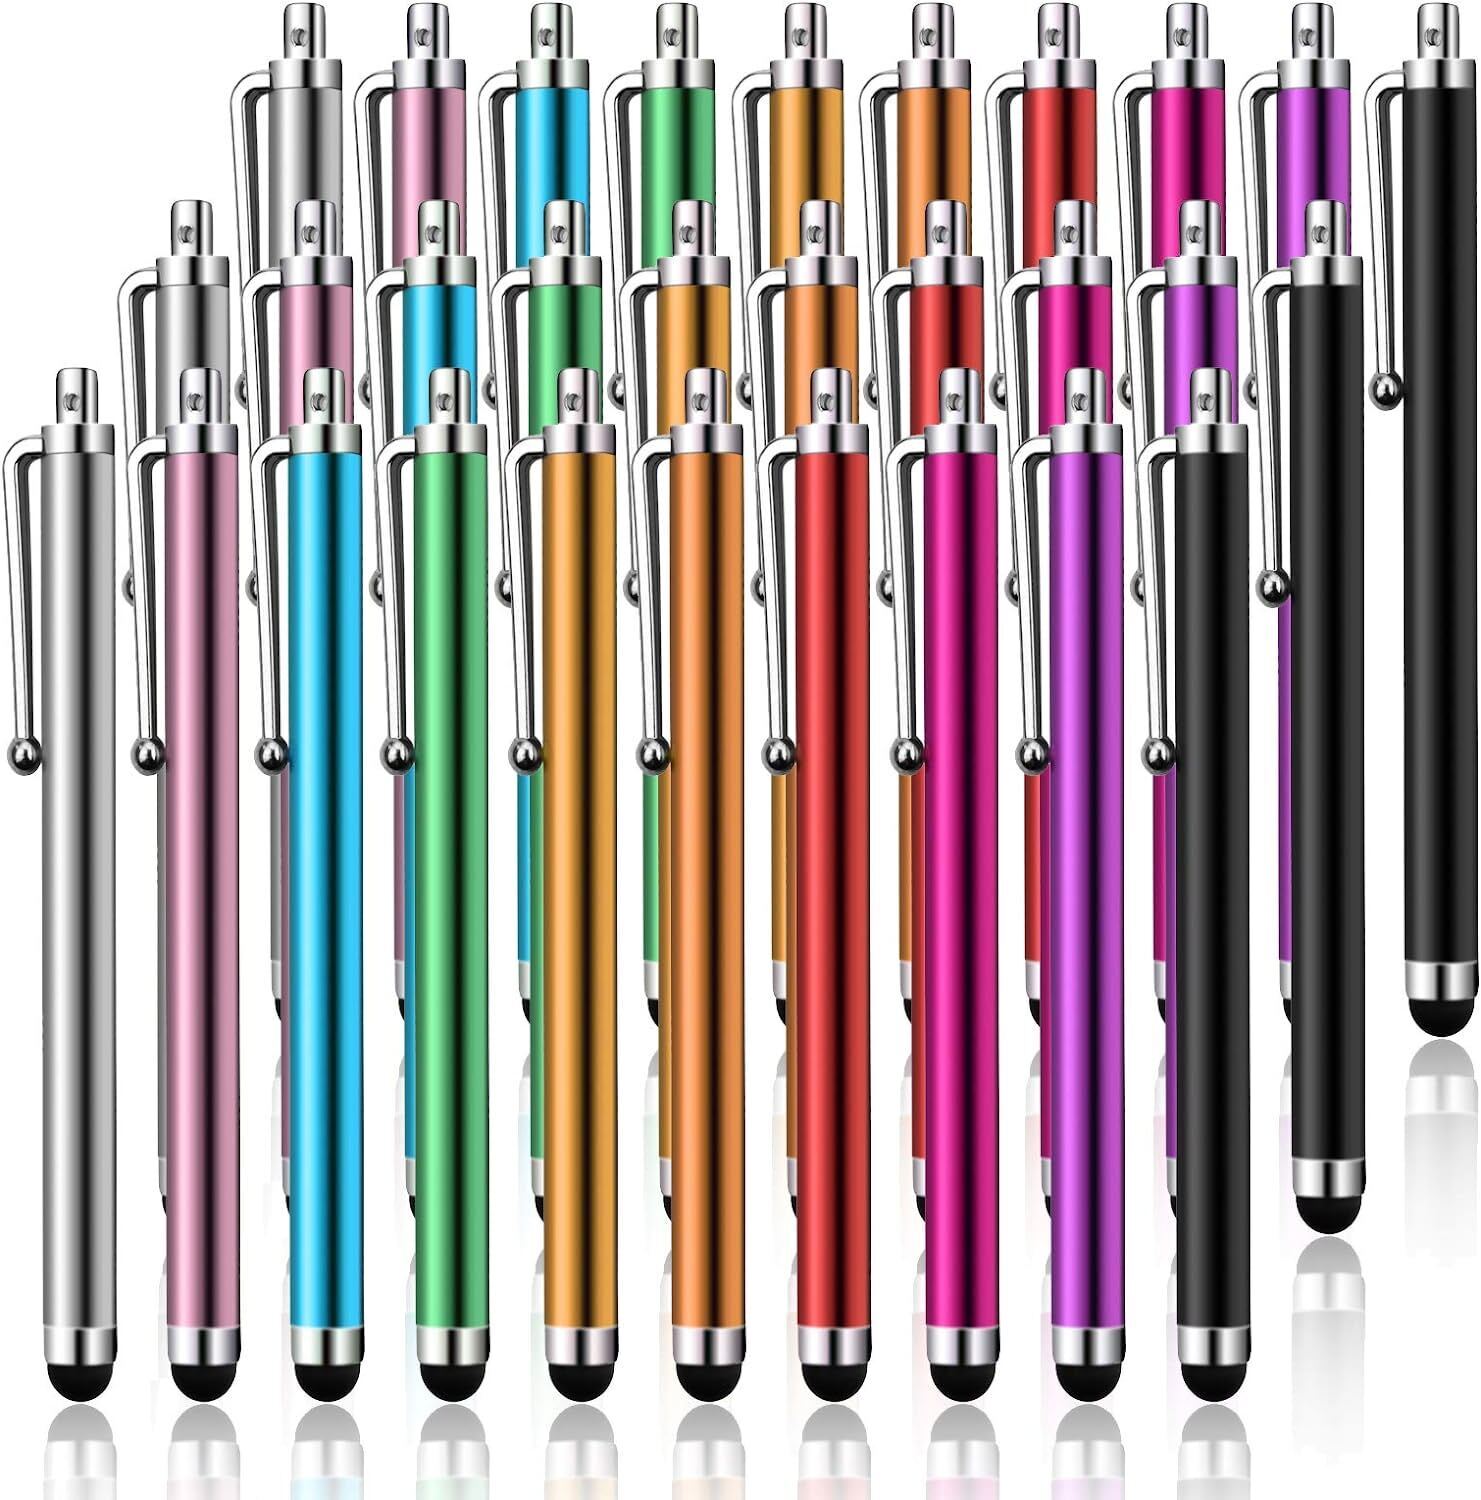 10-40Pcs Stylus Pens For Touch Screen iPad iPhone Samsung Phone Tablet Universal